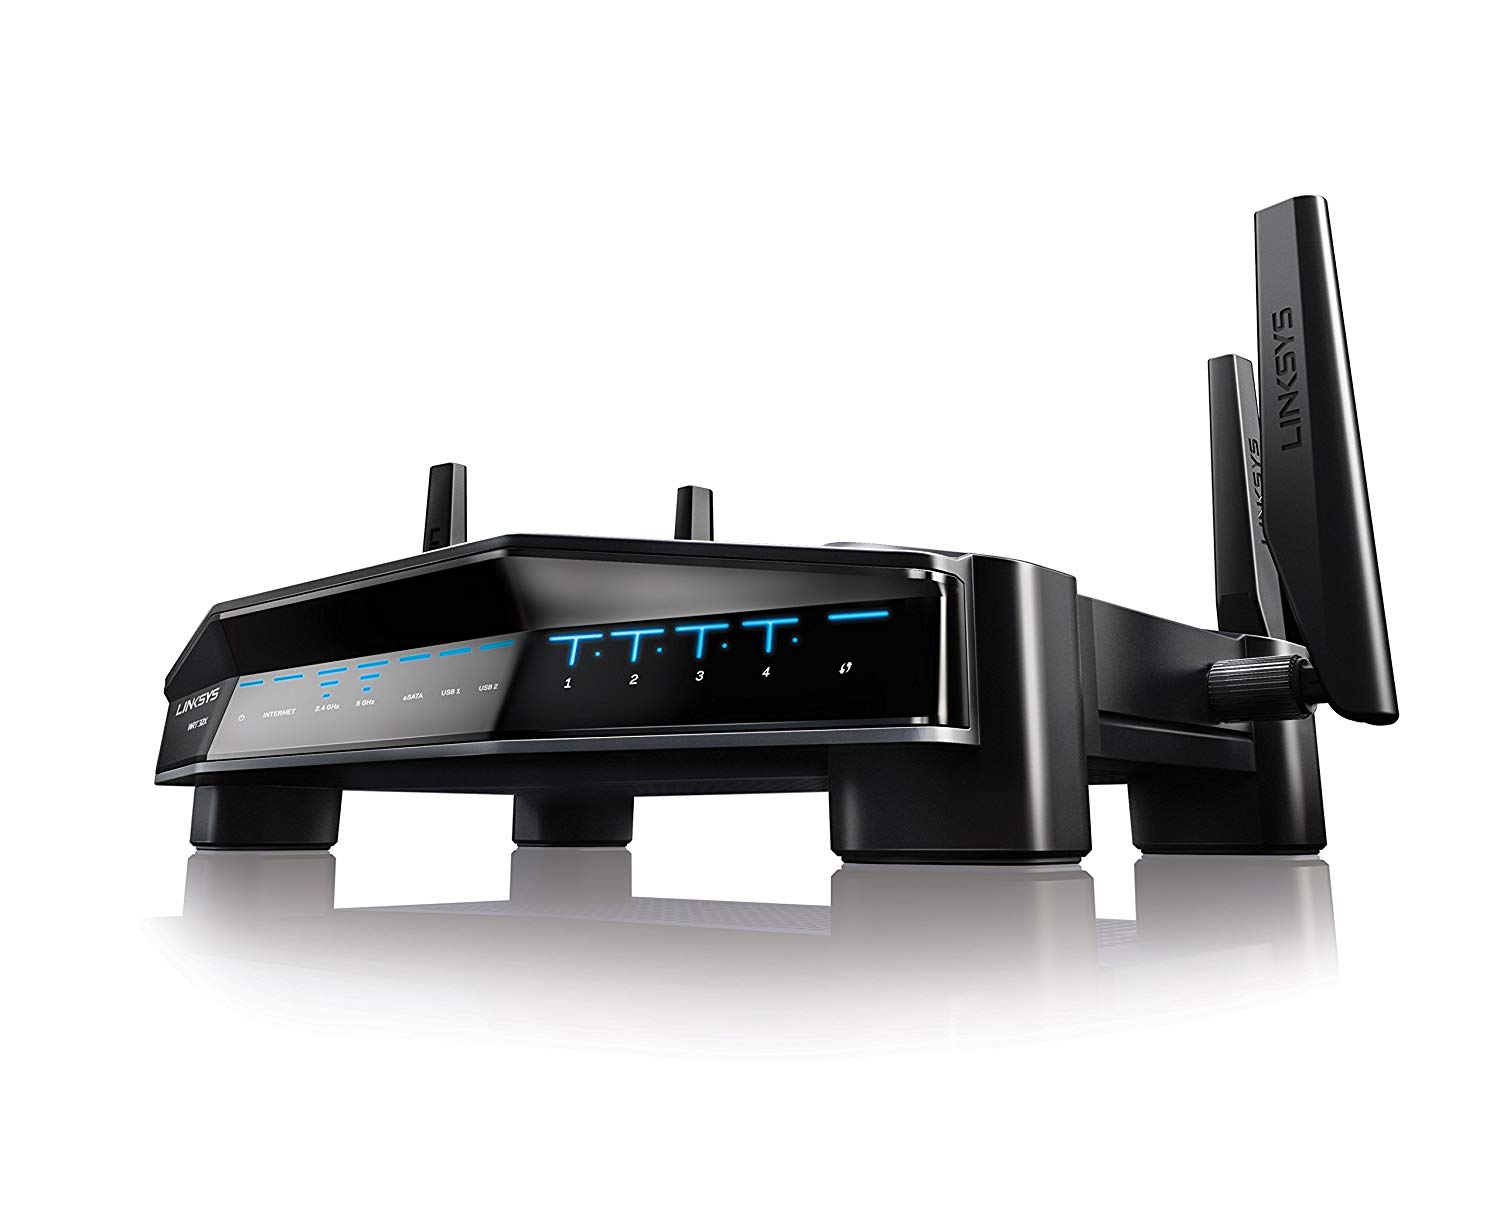 Router gaming Linksys WRT32X-UK solo 133€